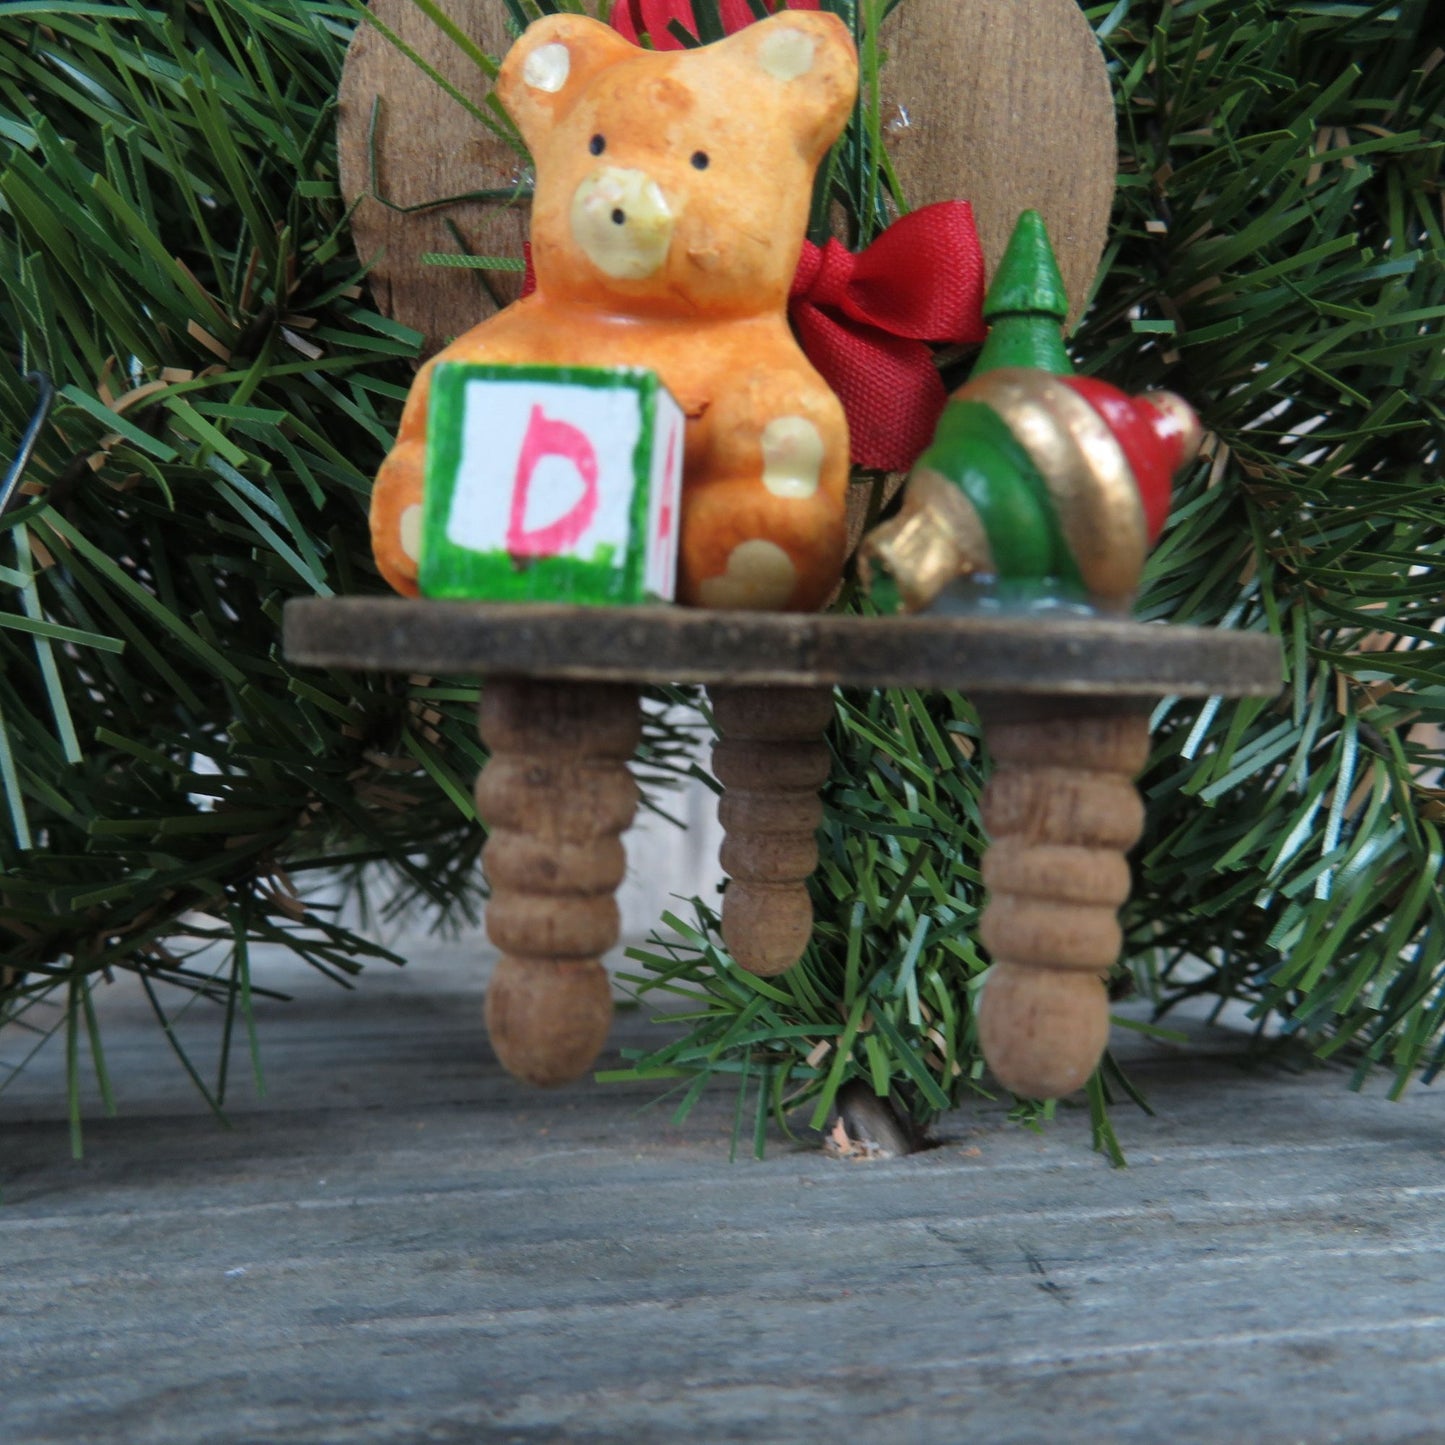 Bear Heart Shaped Chair Wood Ornament Vintage Wooden Child's Toys Teddy Bear and Chair Christmas Ornament